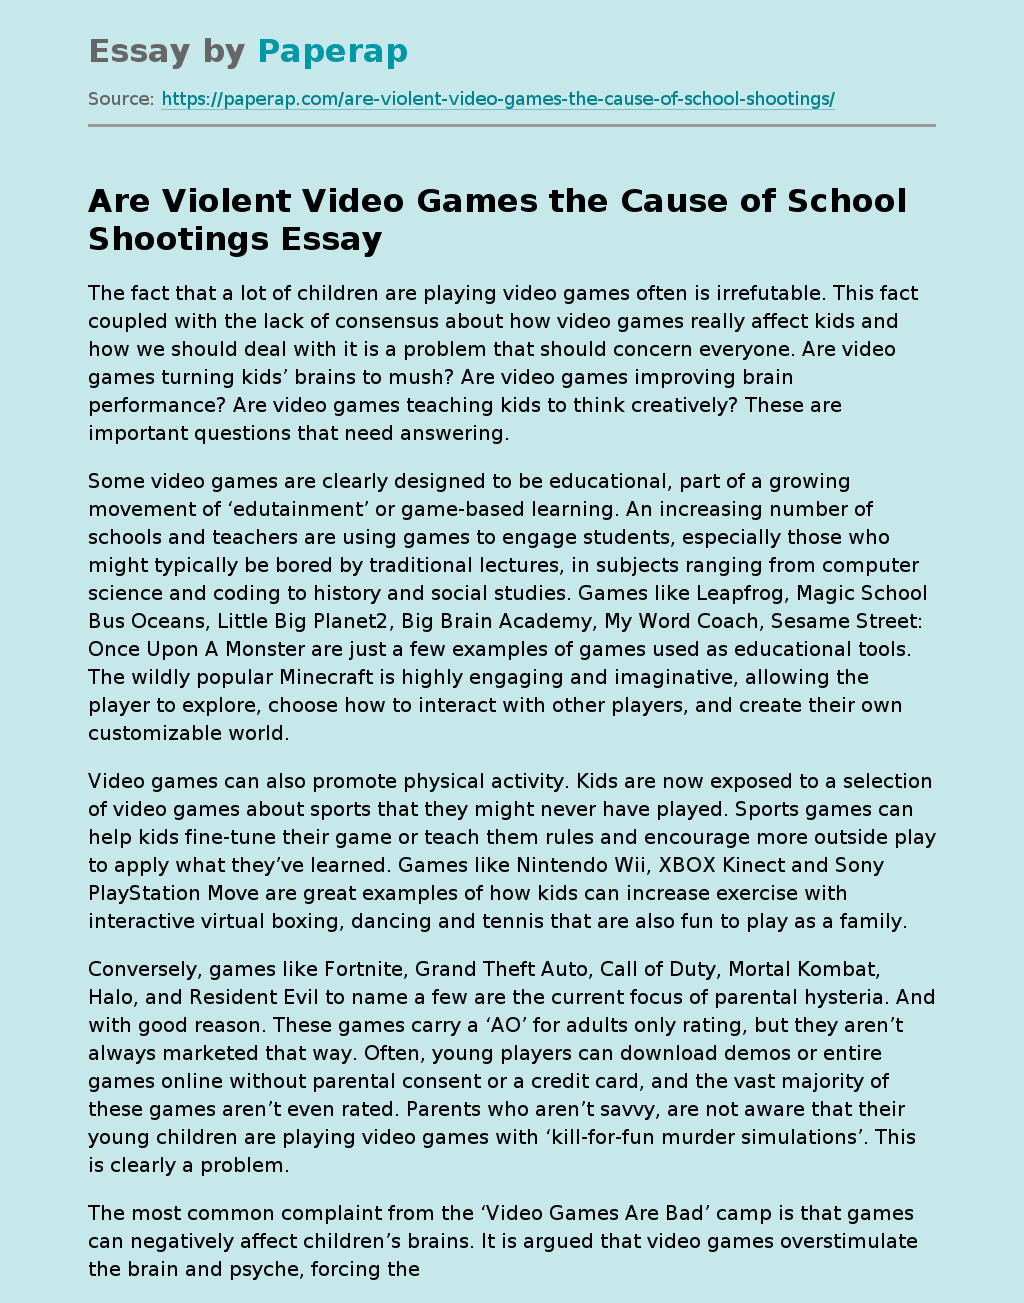 Are Violent Video Games the Cause of School Shootings